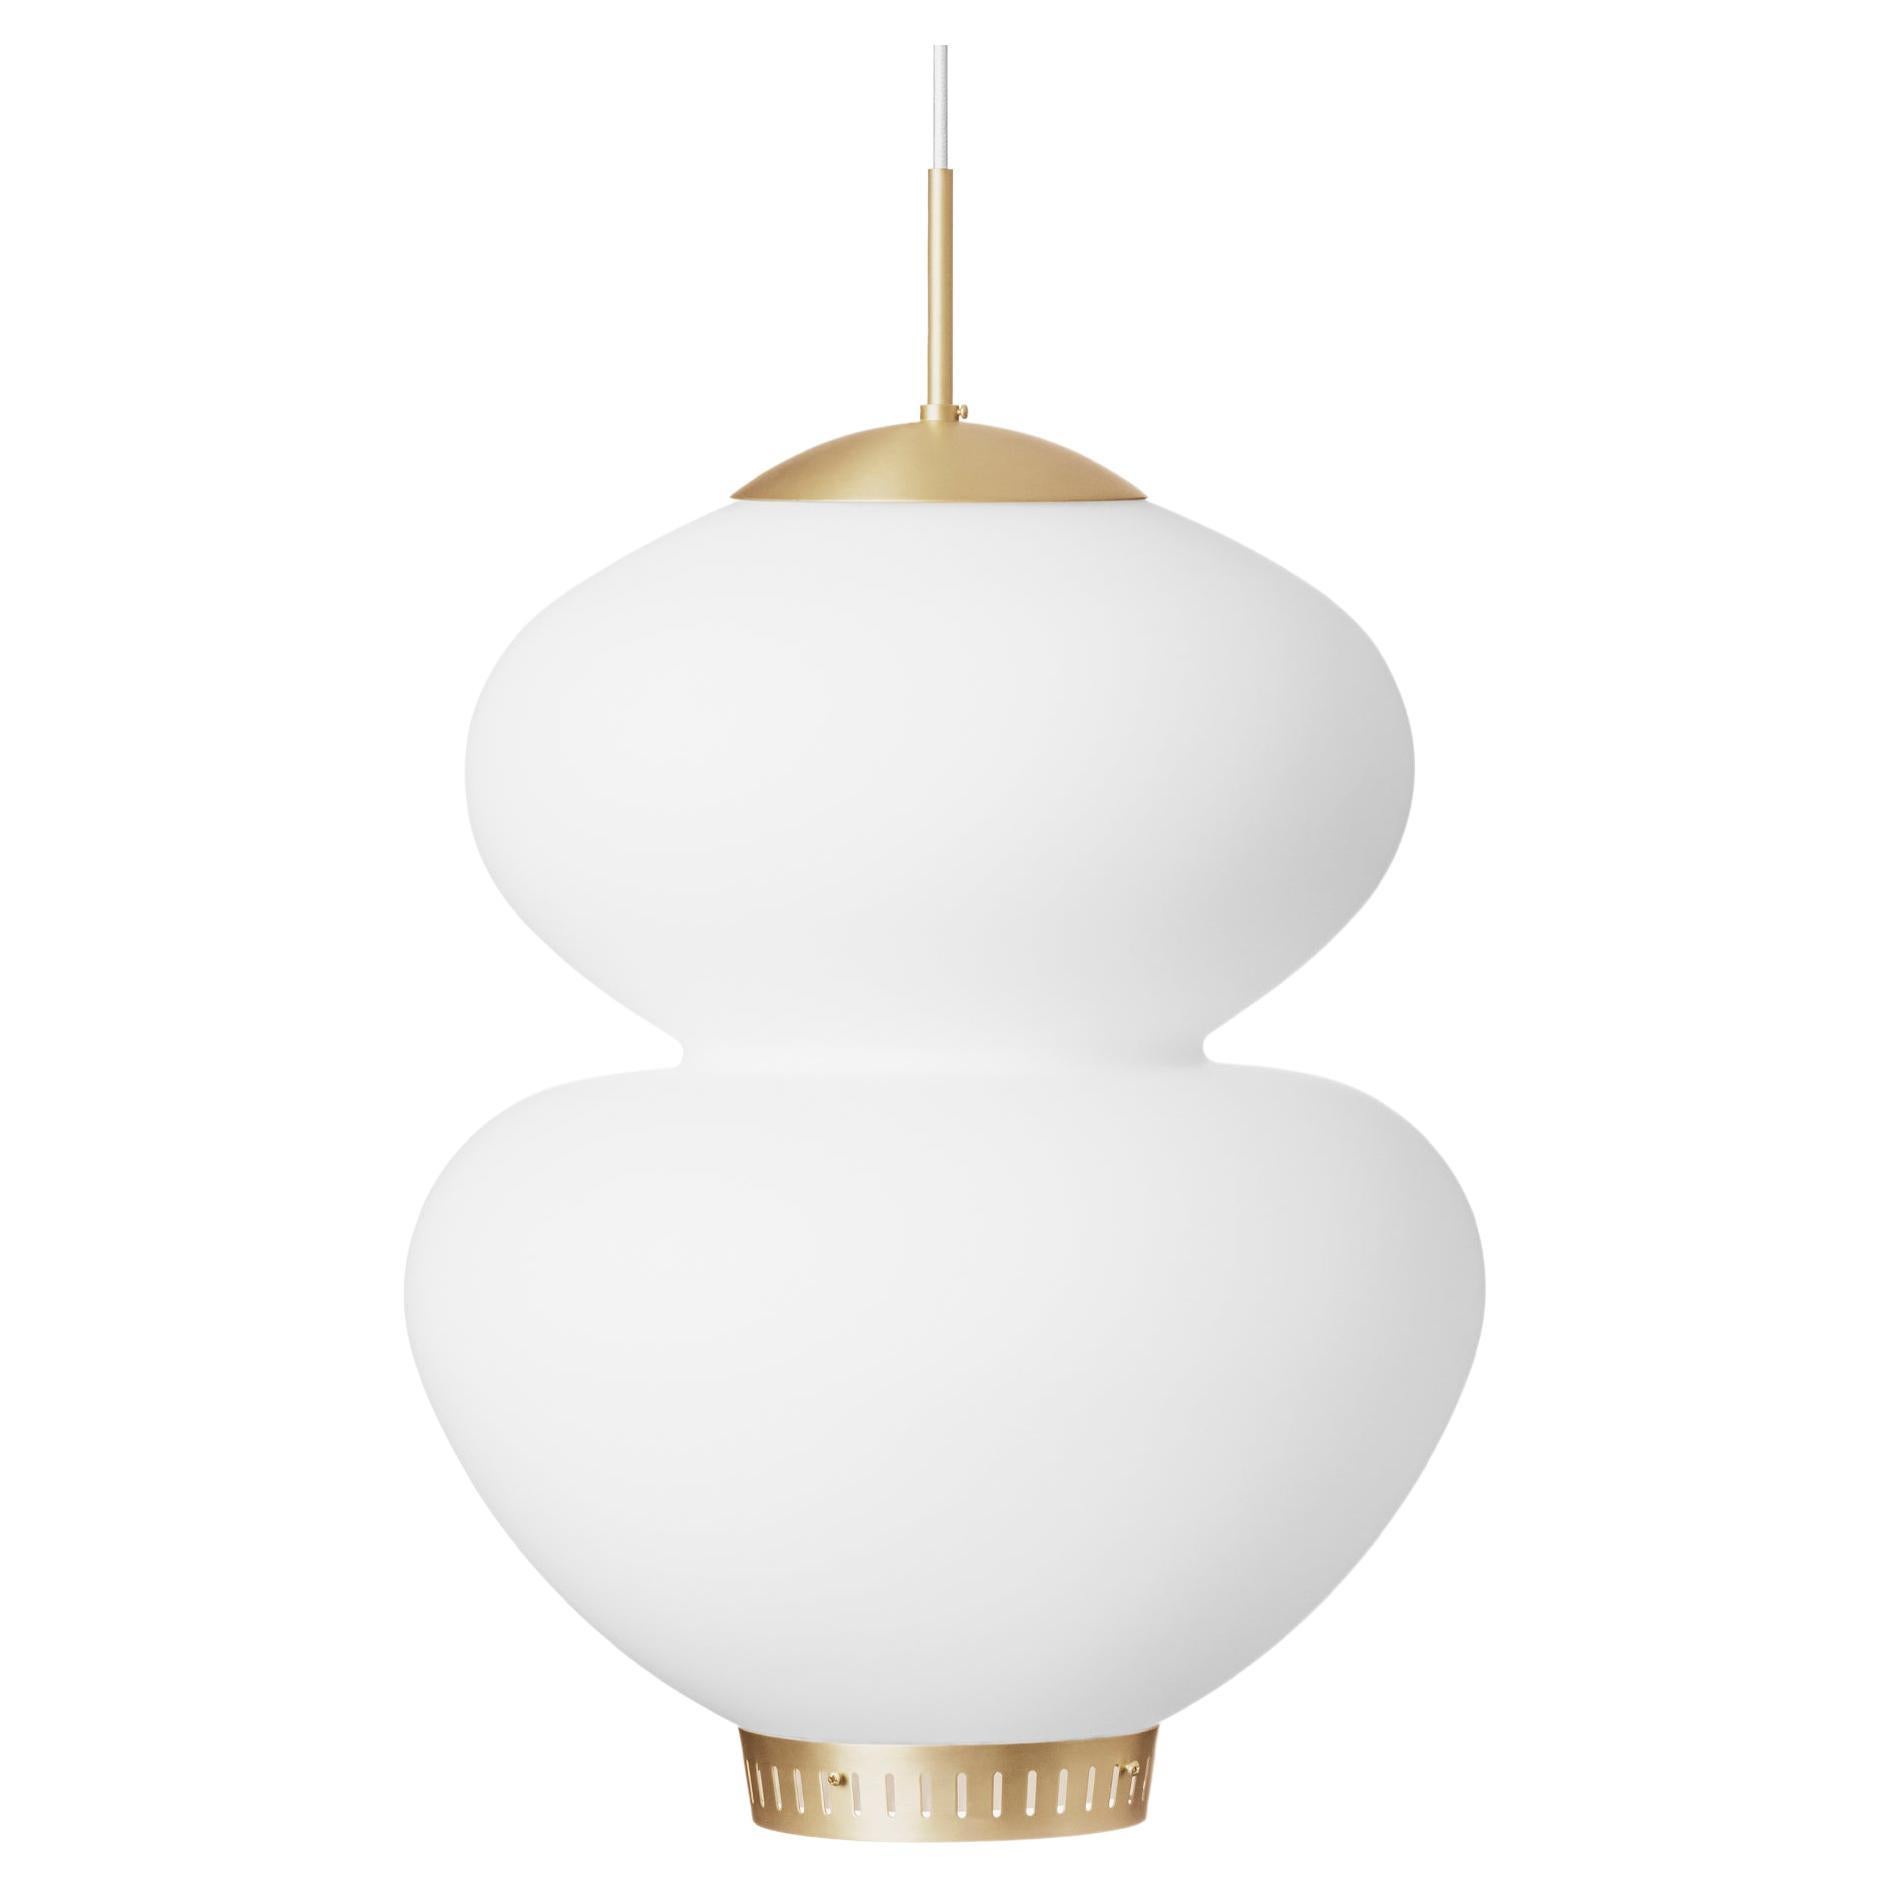 'Peanut 400' Pendant Lamp by Bent Karlby for Lyfa 'New Edition' For Sale